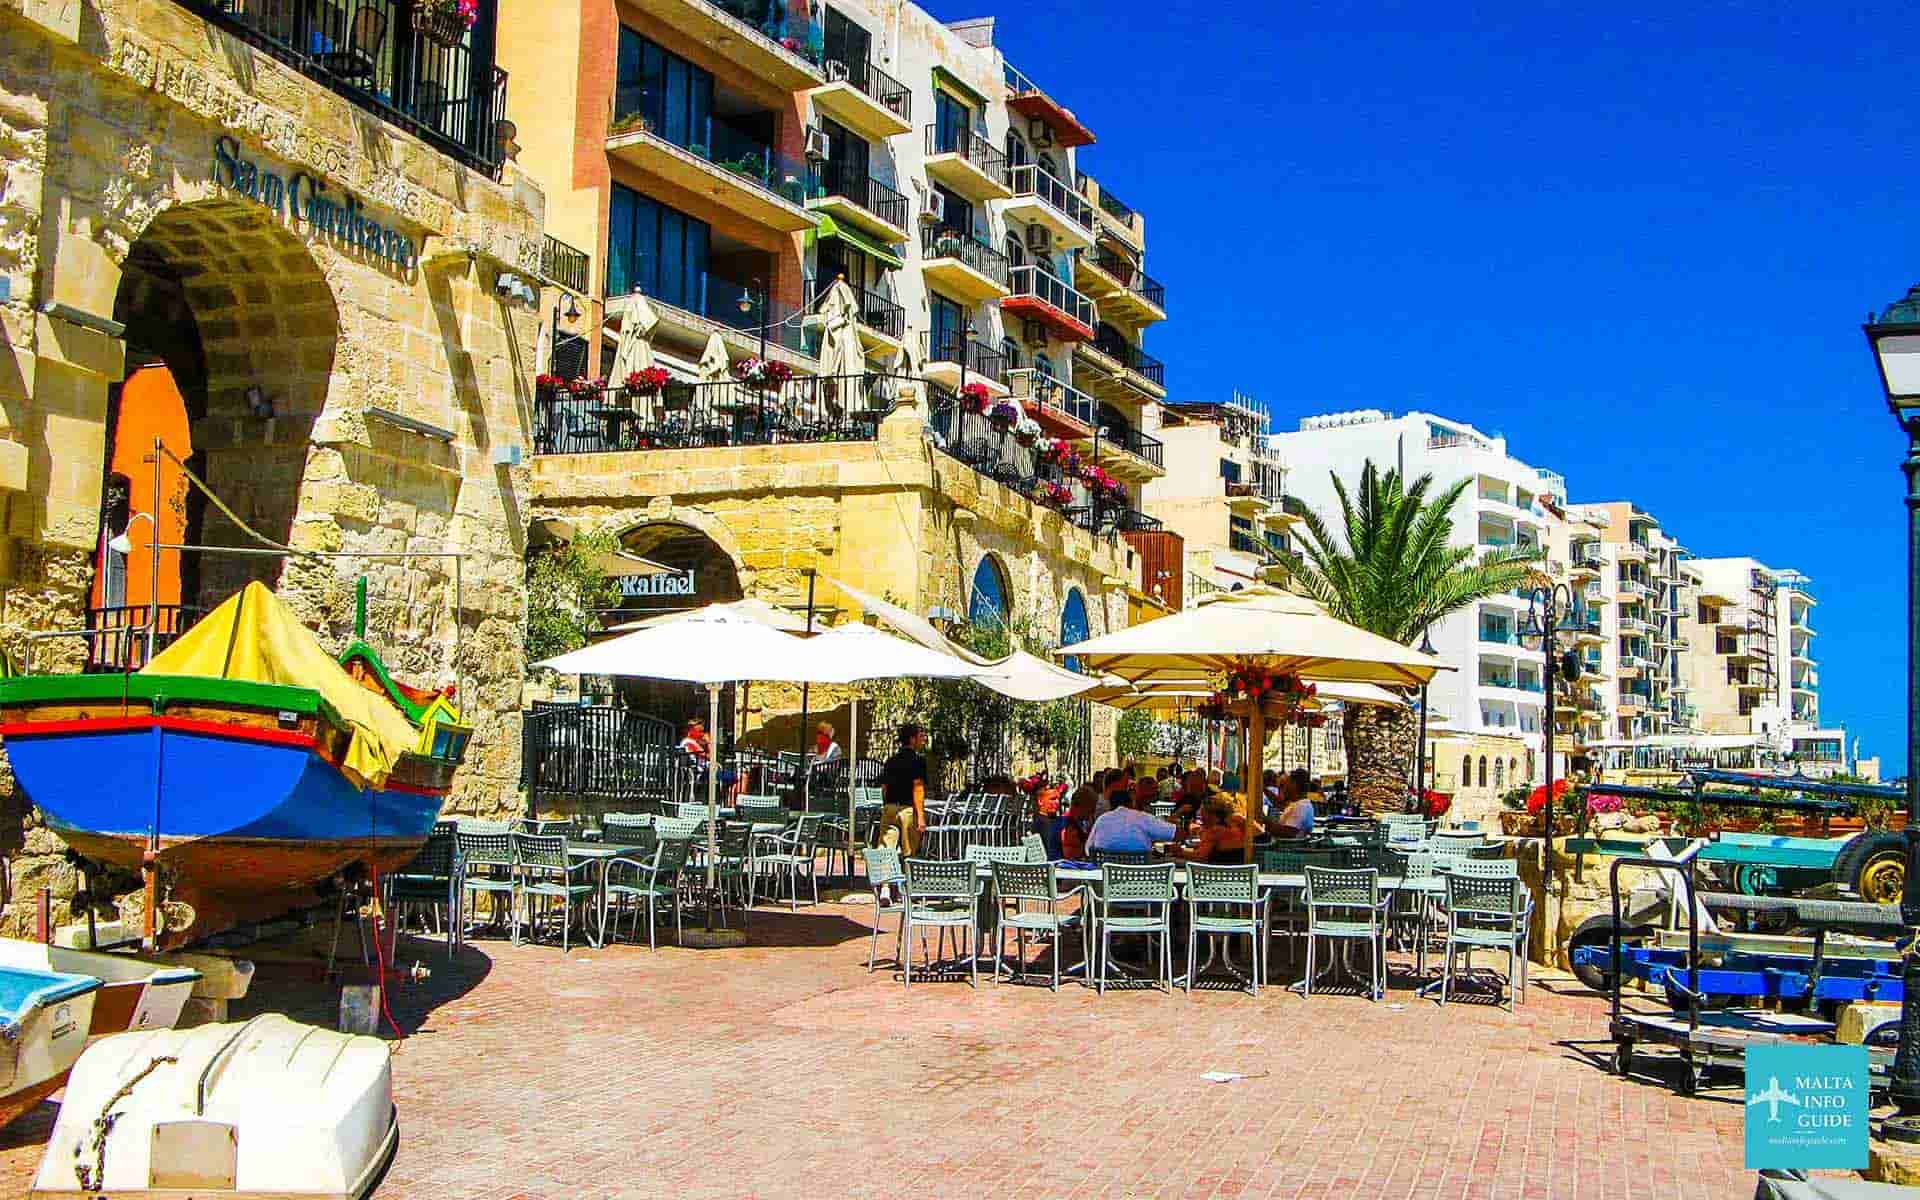 People eating lunch at a restaurant at St. Julian's Bay Malta.